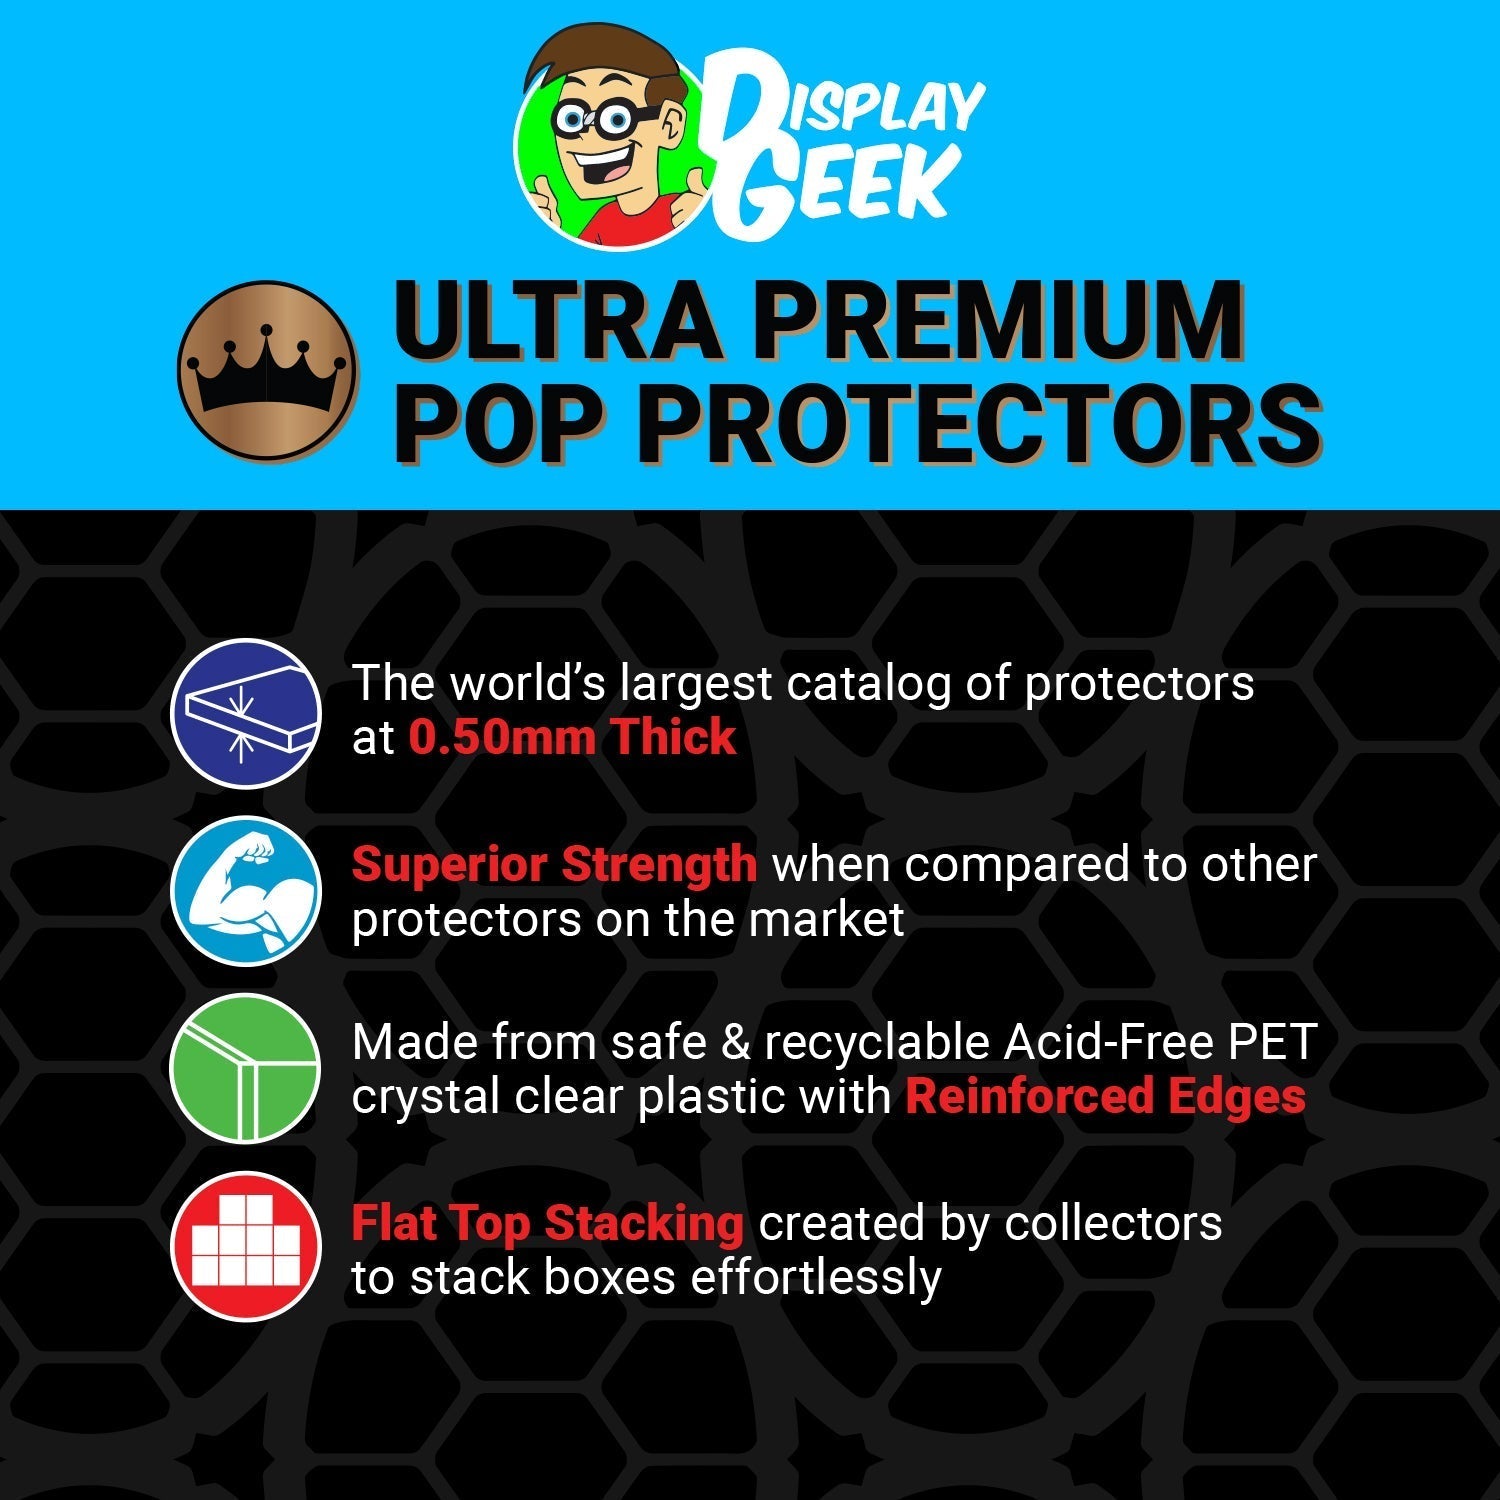 Pop Protector for Wolverine's Motorcycle #26 Funko Pop Rides - PPG Pop Protector Guide Search Created by Display Geek